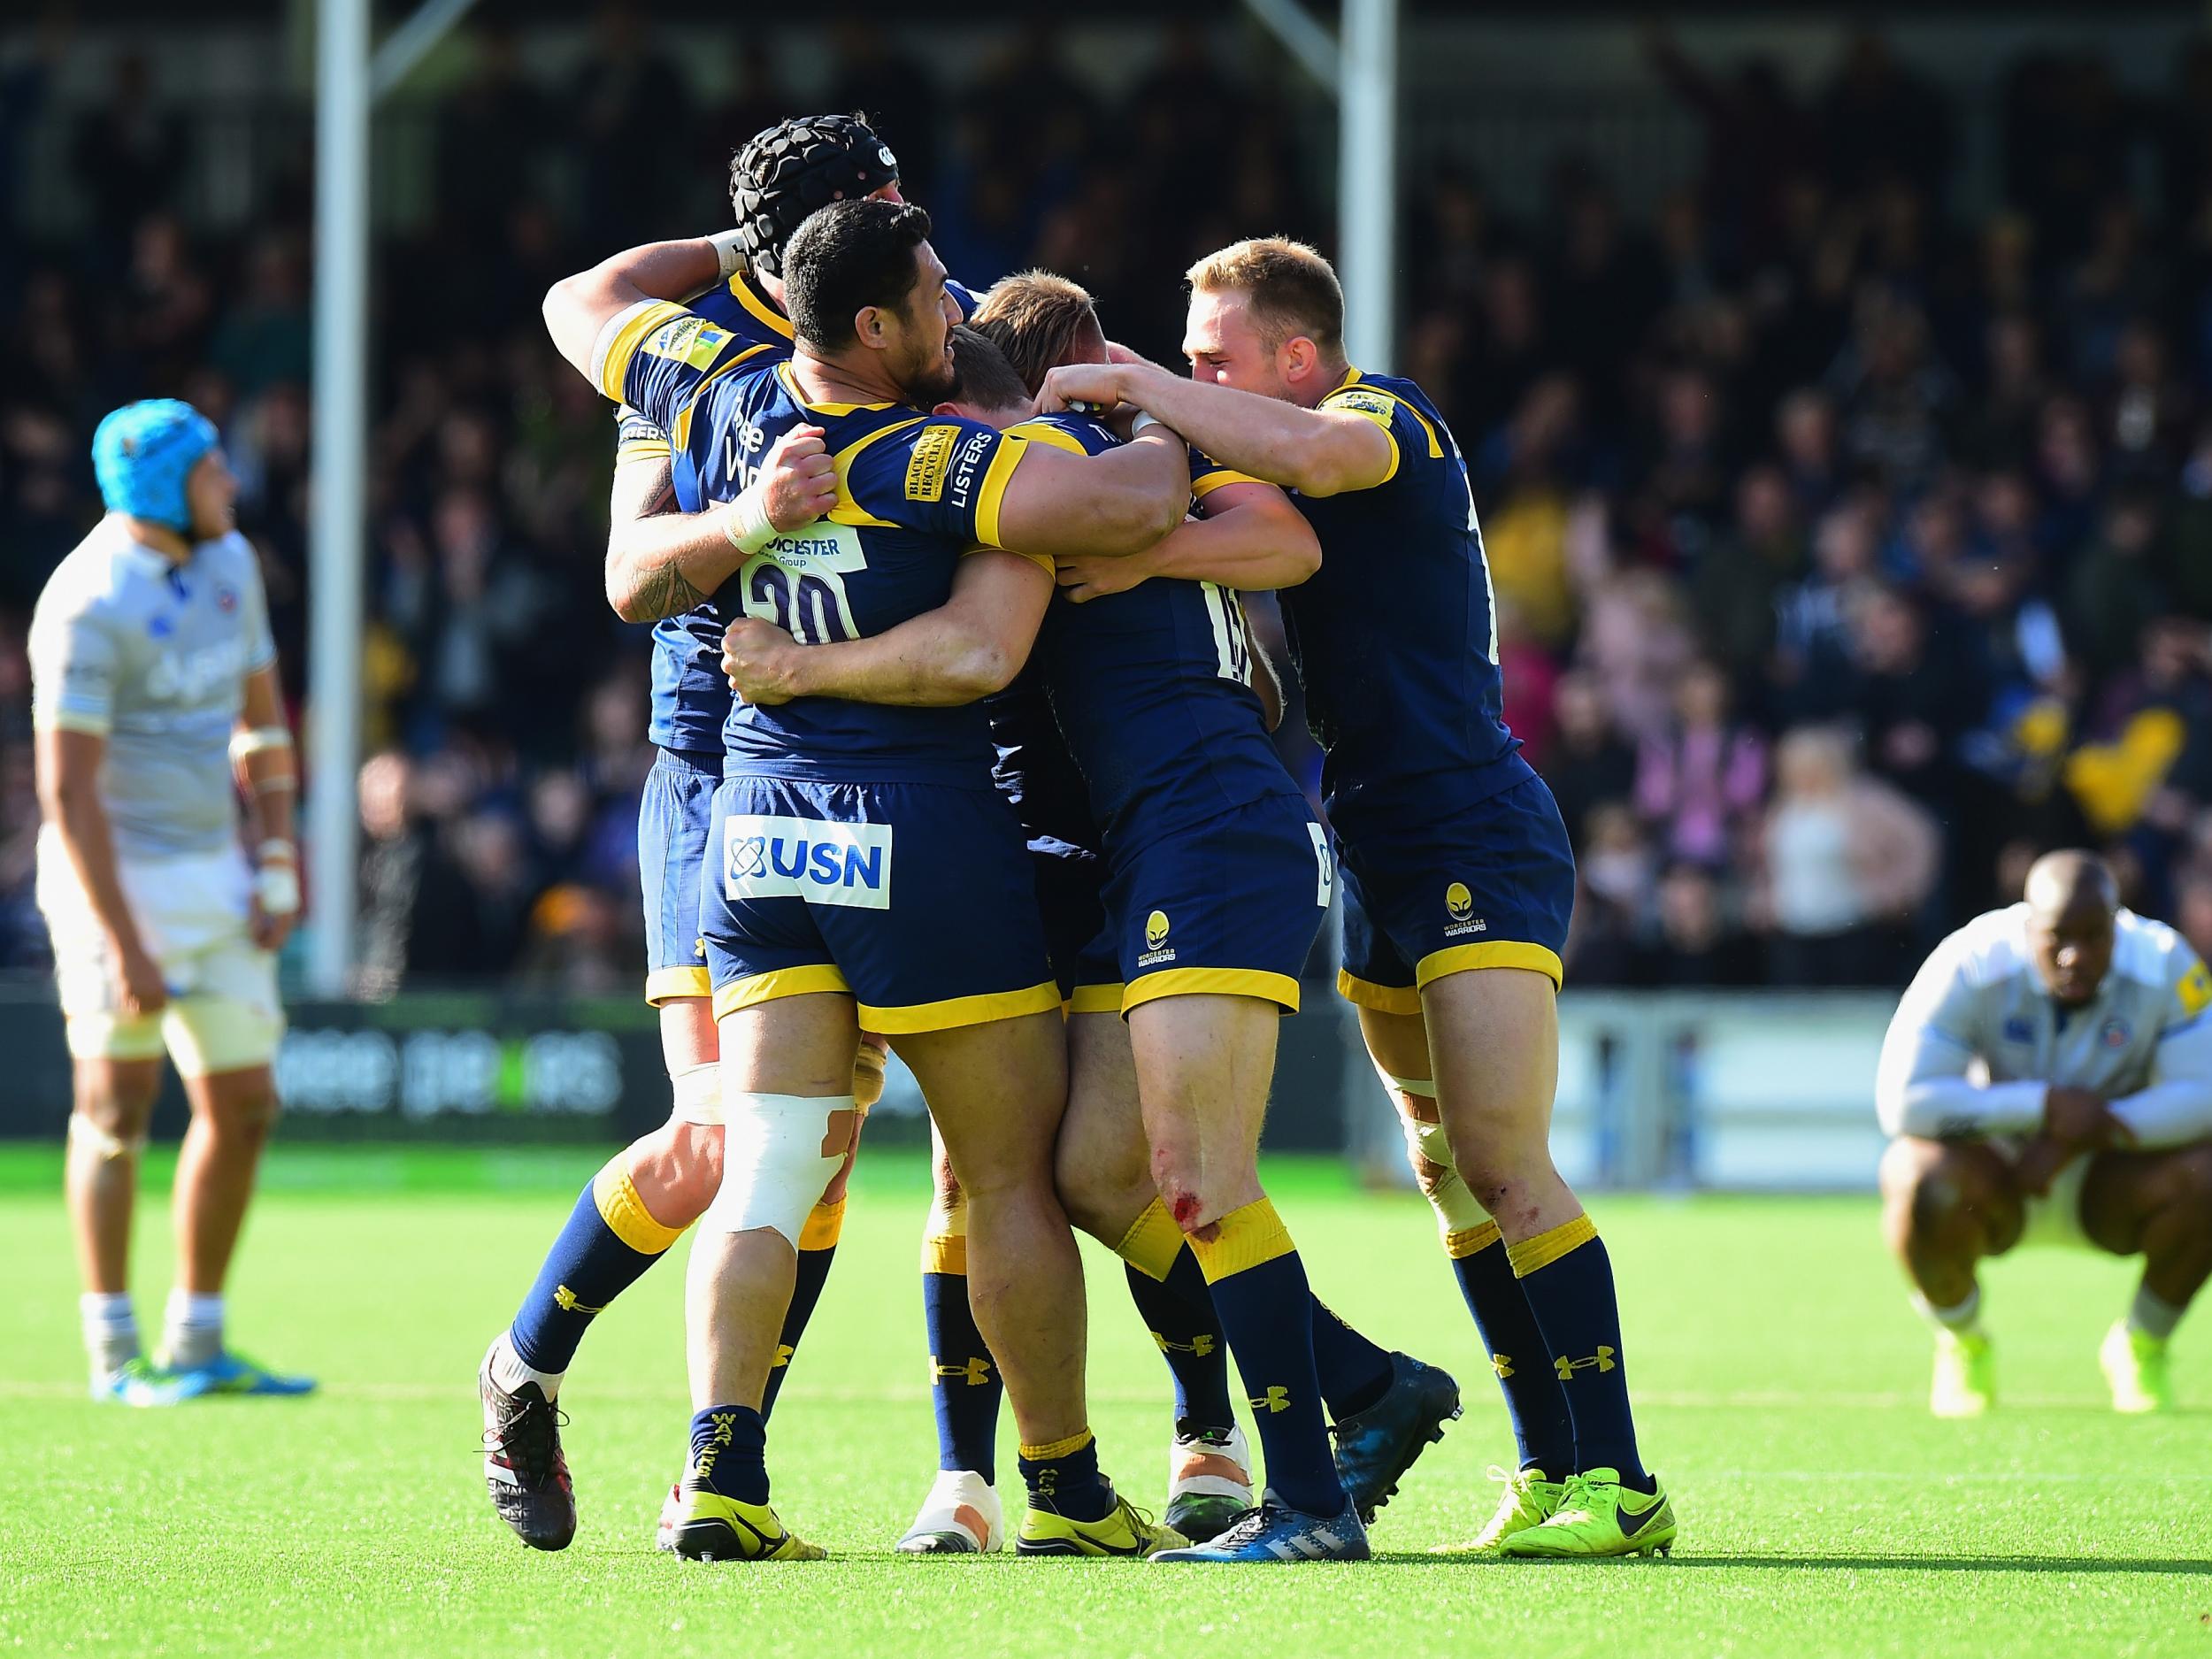 Worcester have moved closer to Premiership survival